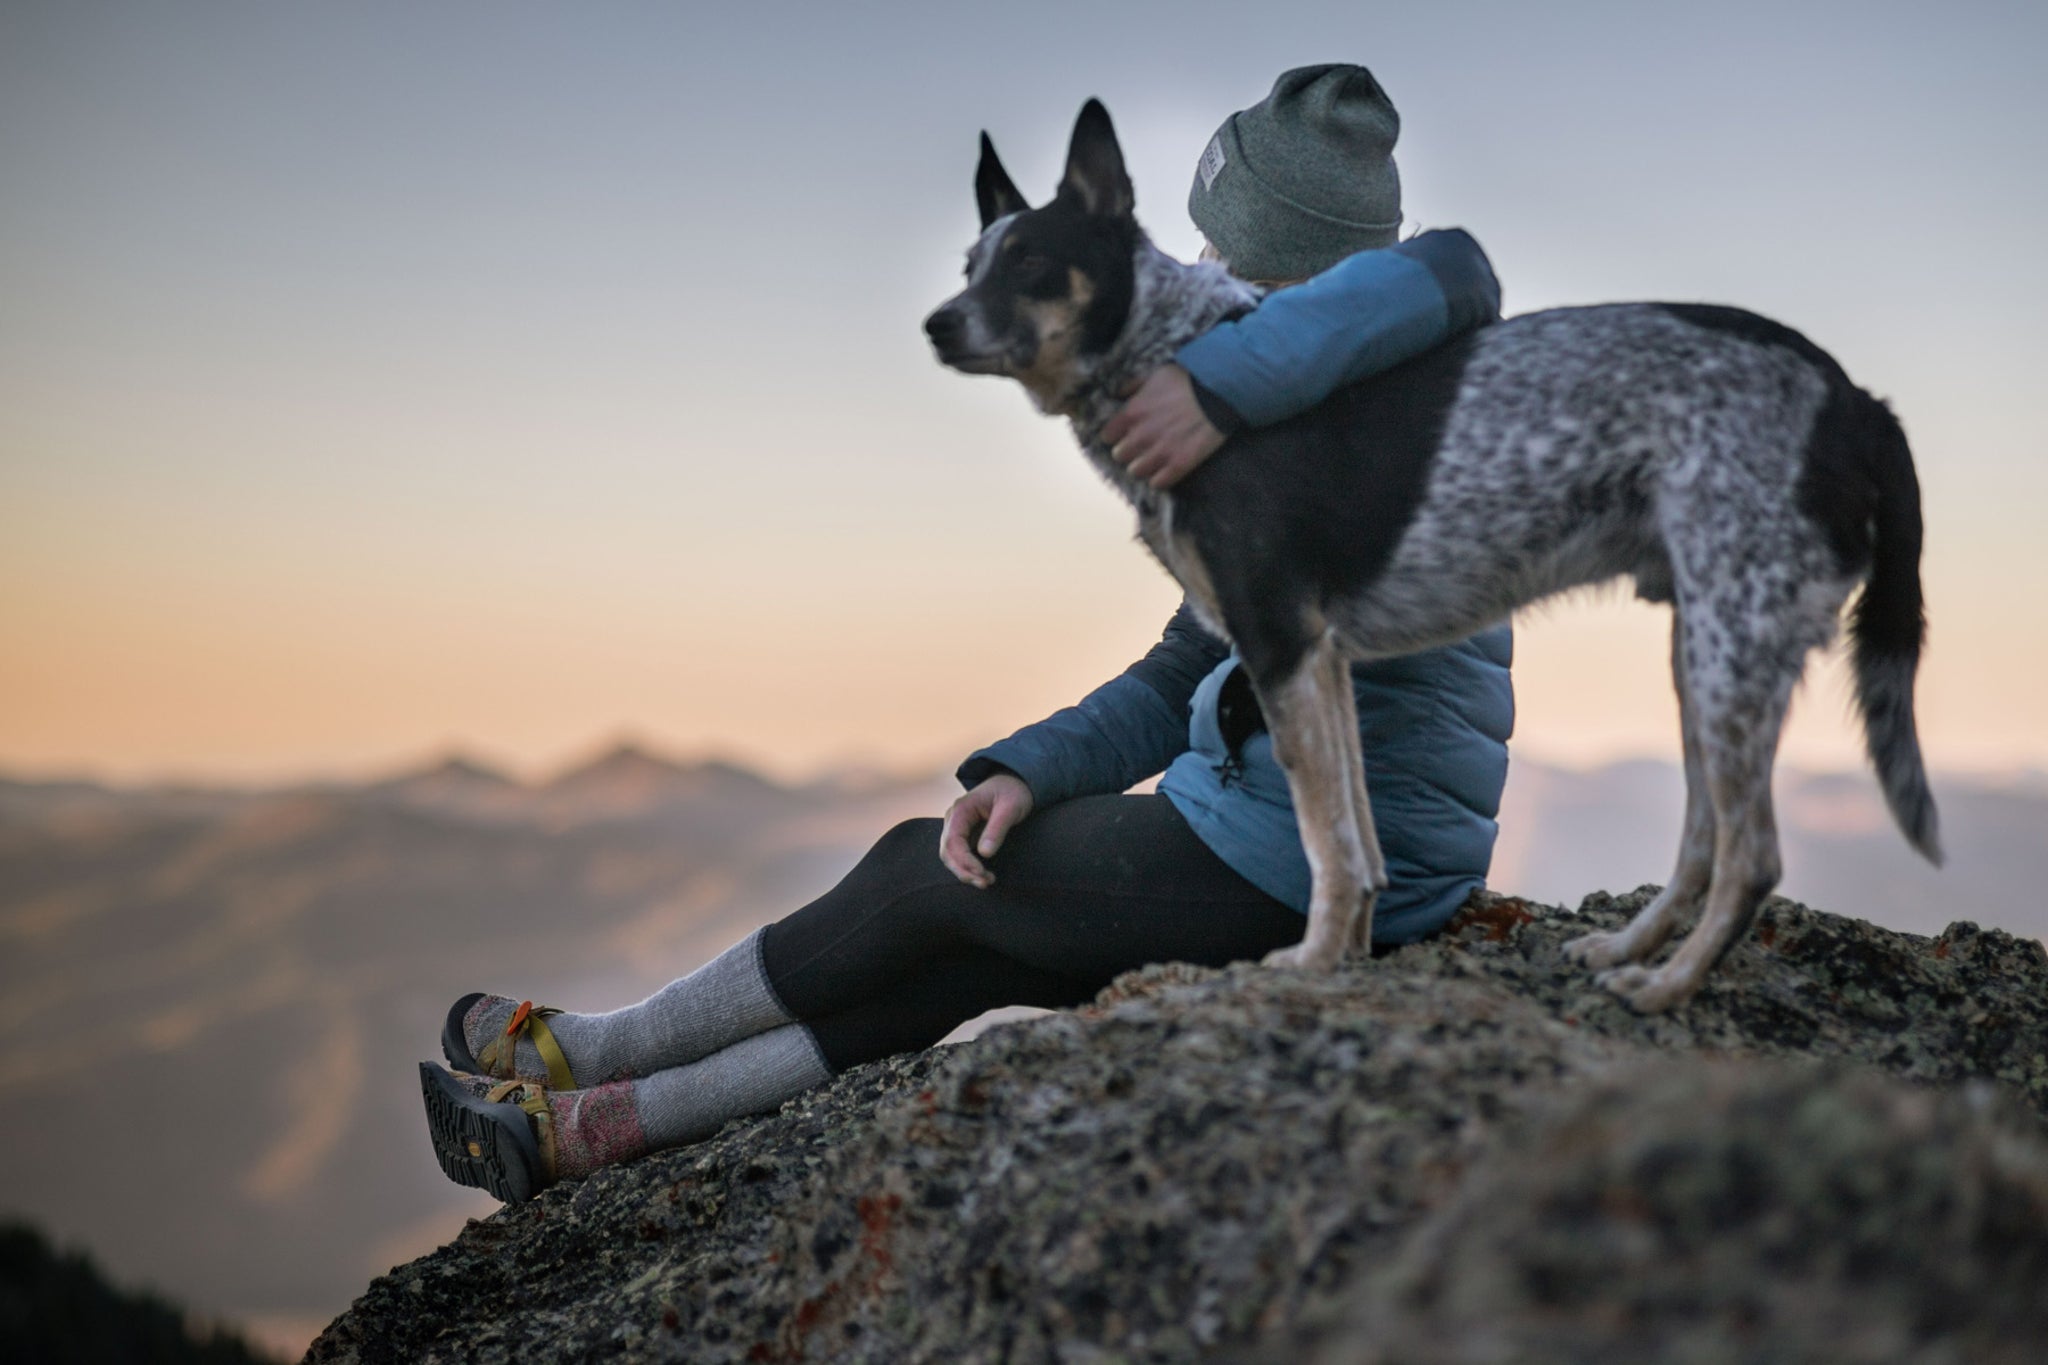 057_person_sitting_on_mountaintop_at_sunrise_with_large_black_and_white_spotted_dog.jpg